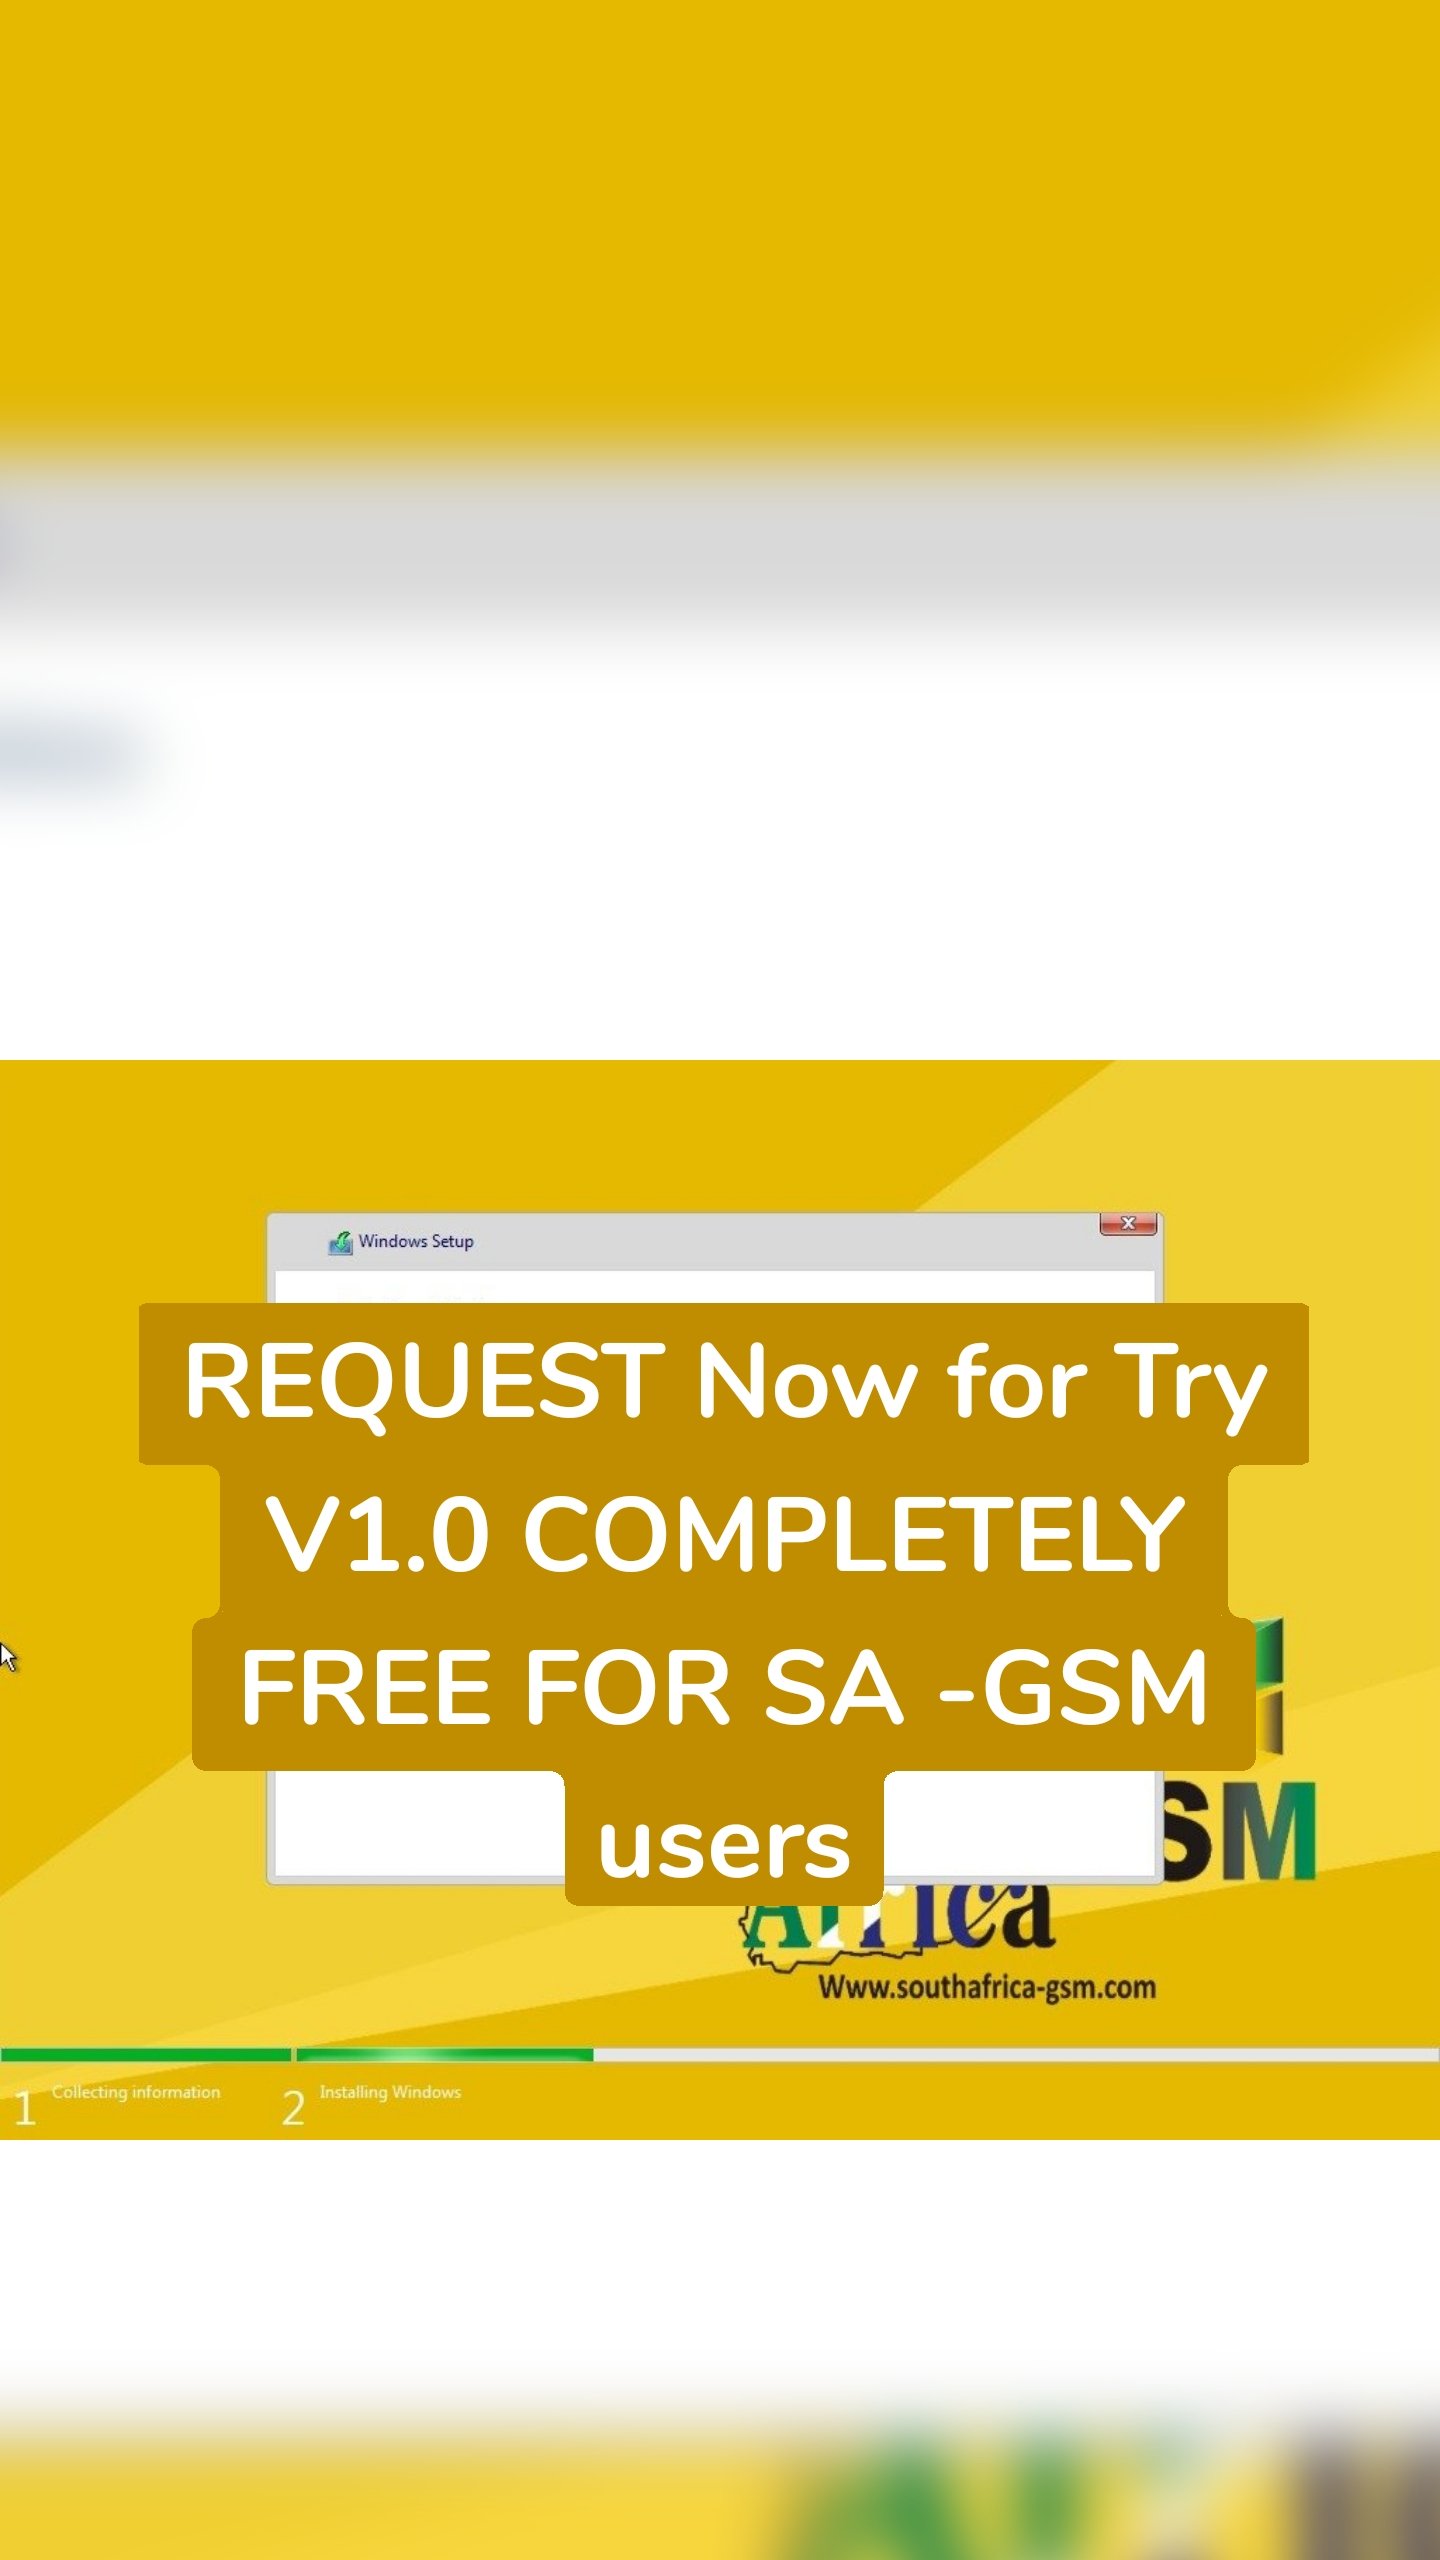 REQUEST Now for Try
V1.0 COMPLETELY FREE FOR SA -GSM users